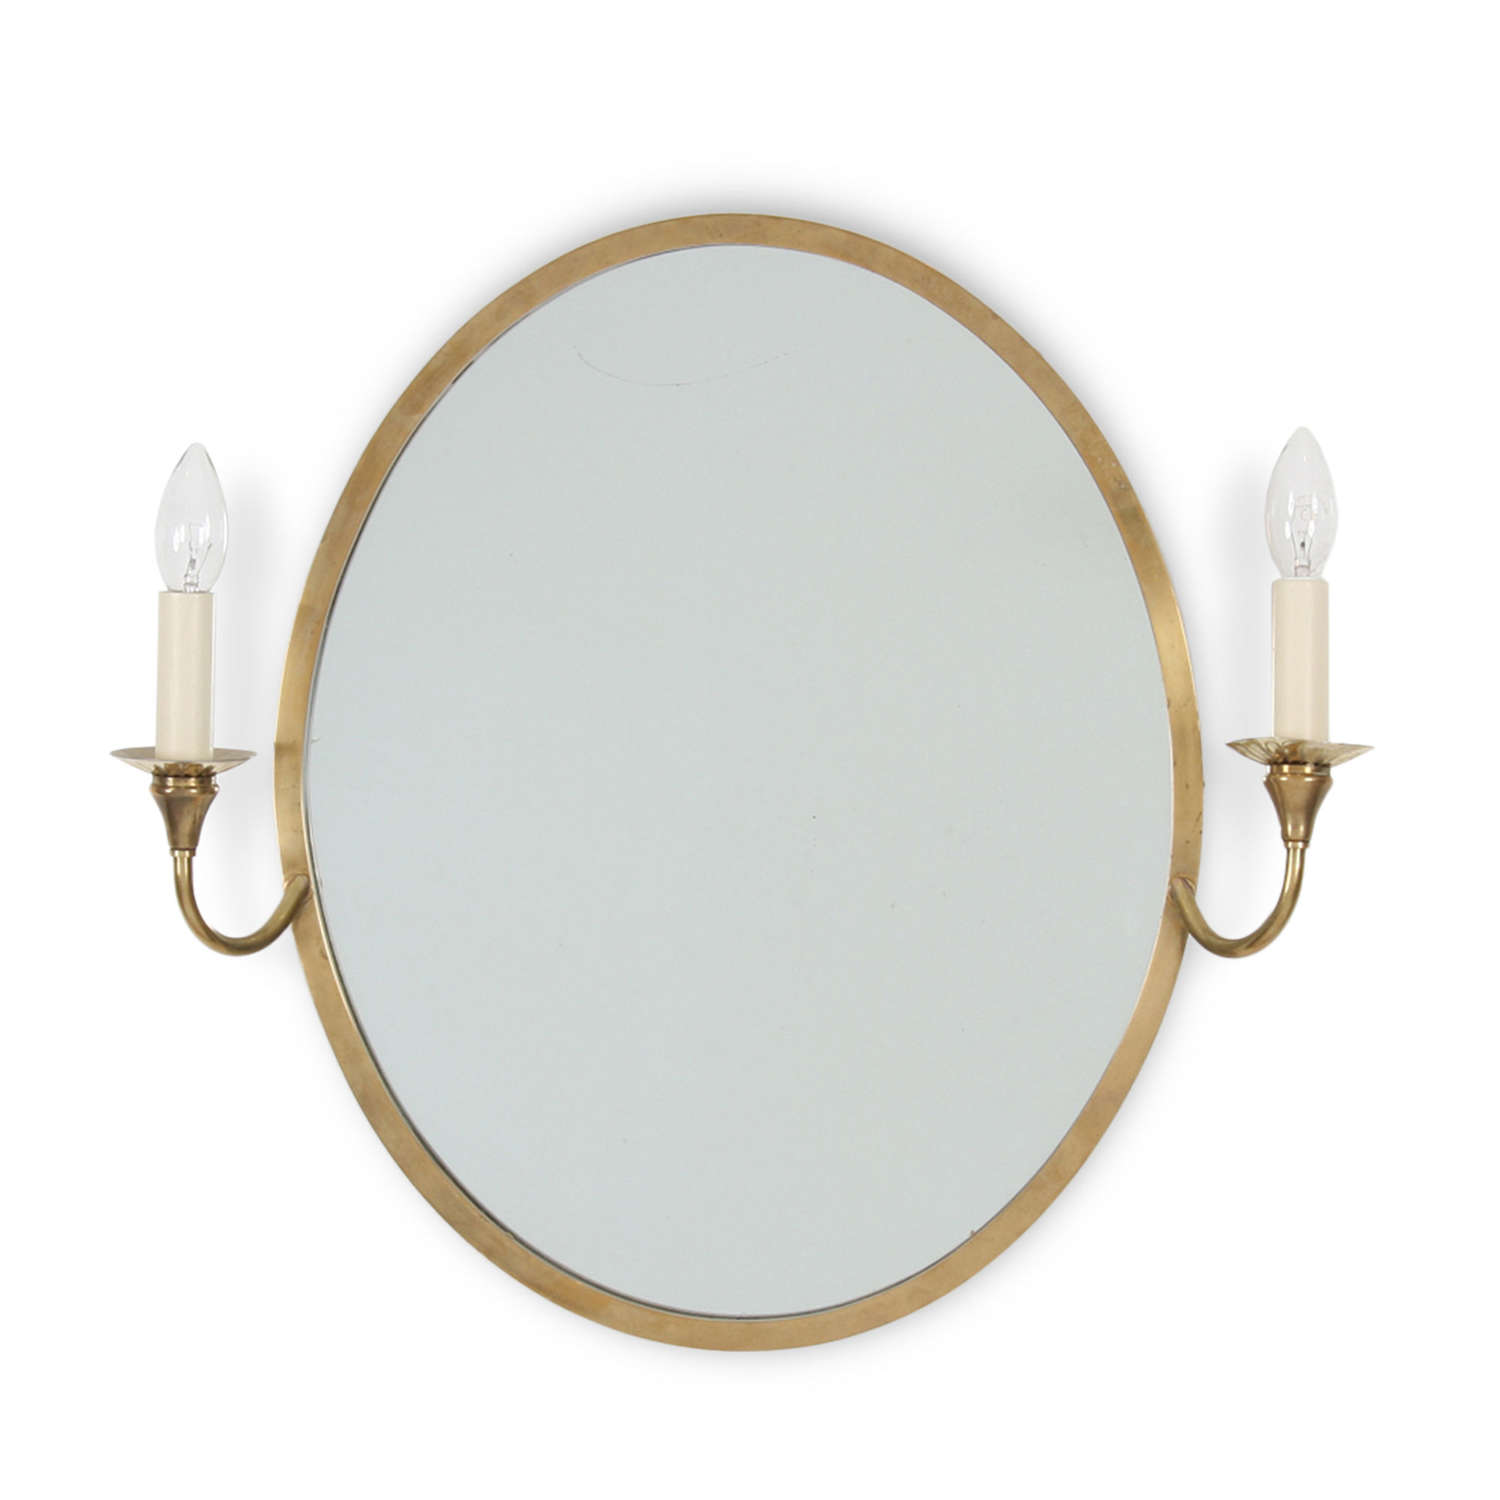 French Oval Mirror With Candle Lights